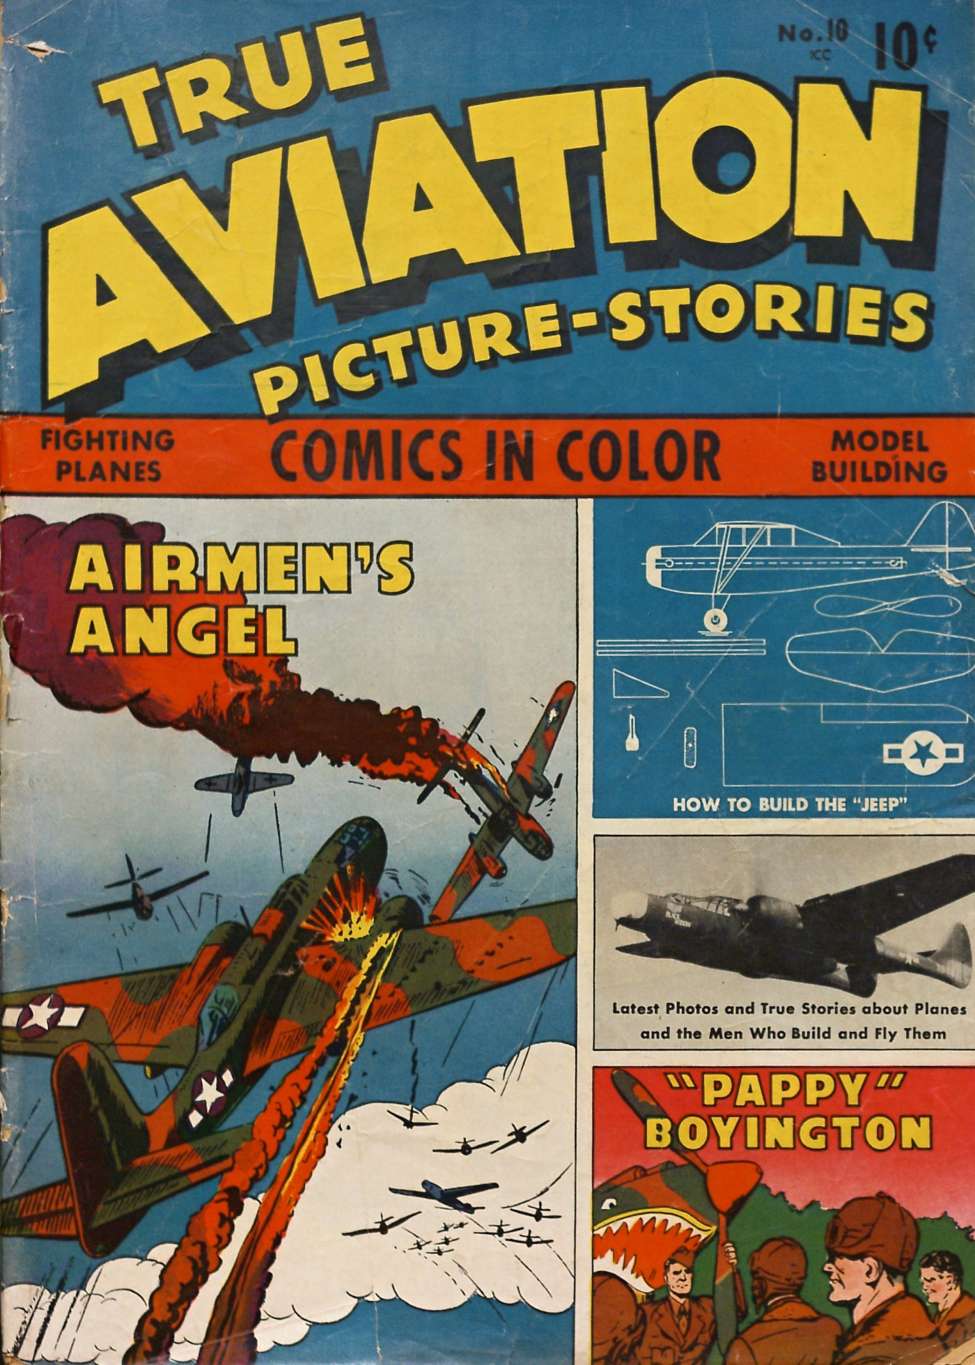 Book Cover For True Aviation Picture Stories 10